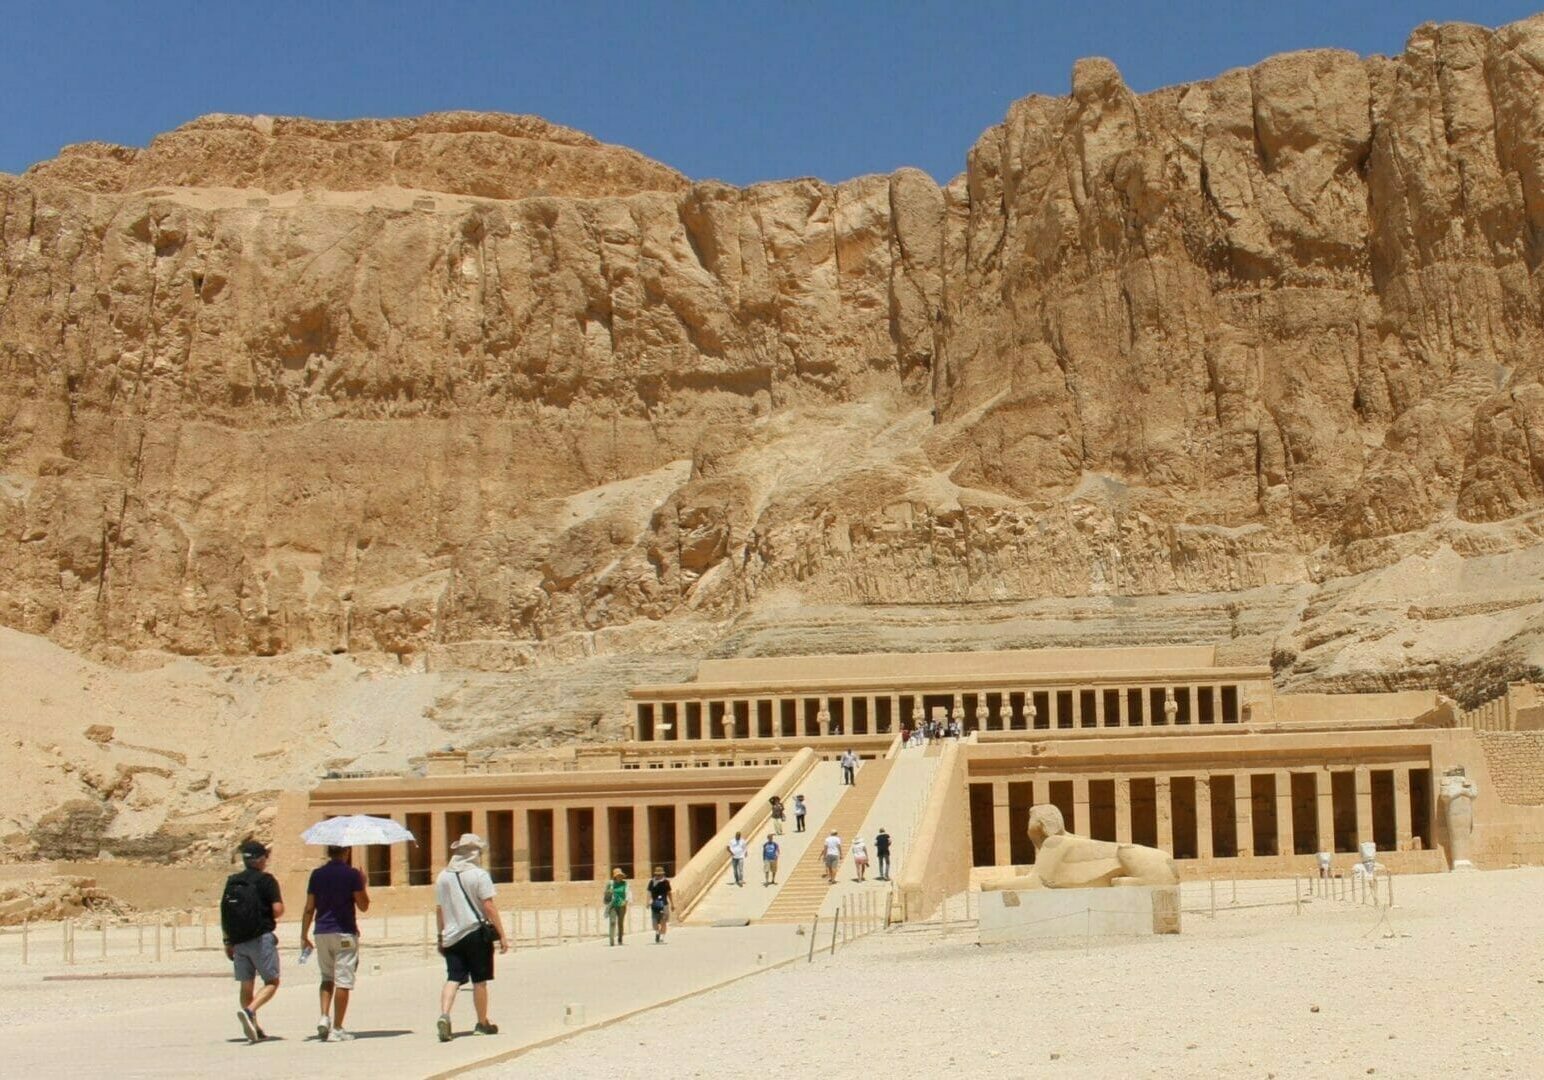 Hatshepsut Temple, The most powerful woman in Ancient Egypt